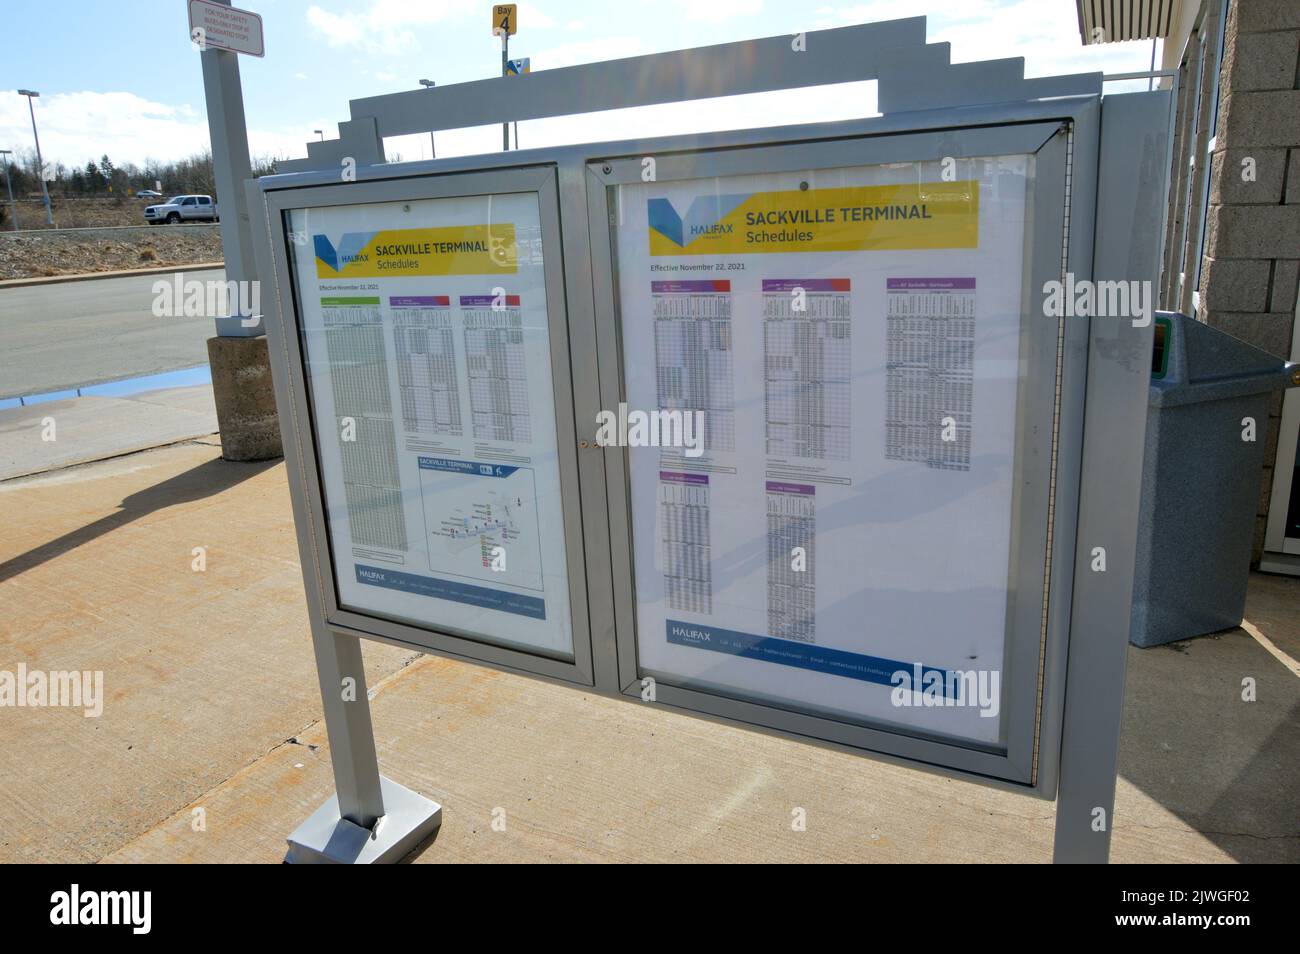 Bus schedules at Sackville Terminal of the Halifax Transit system in Halifax, Nova Scotia, Canada Stock Photo